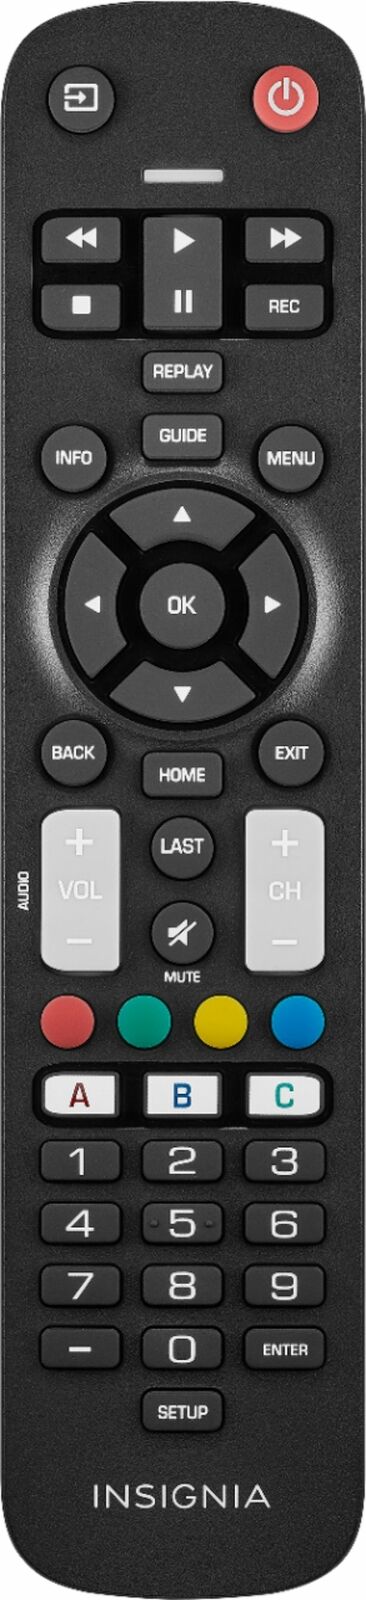 Insignia- Replacement Remote for Insignia and Dynex TVs - Black